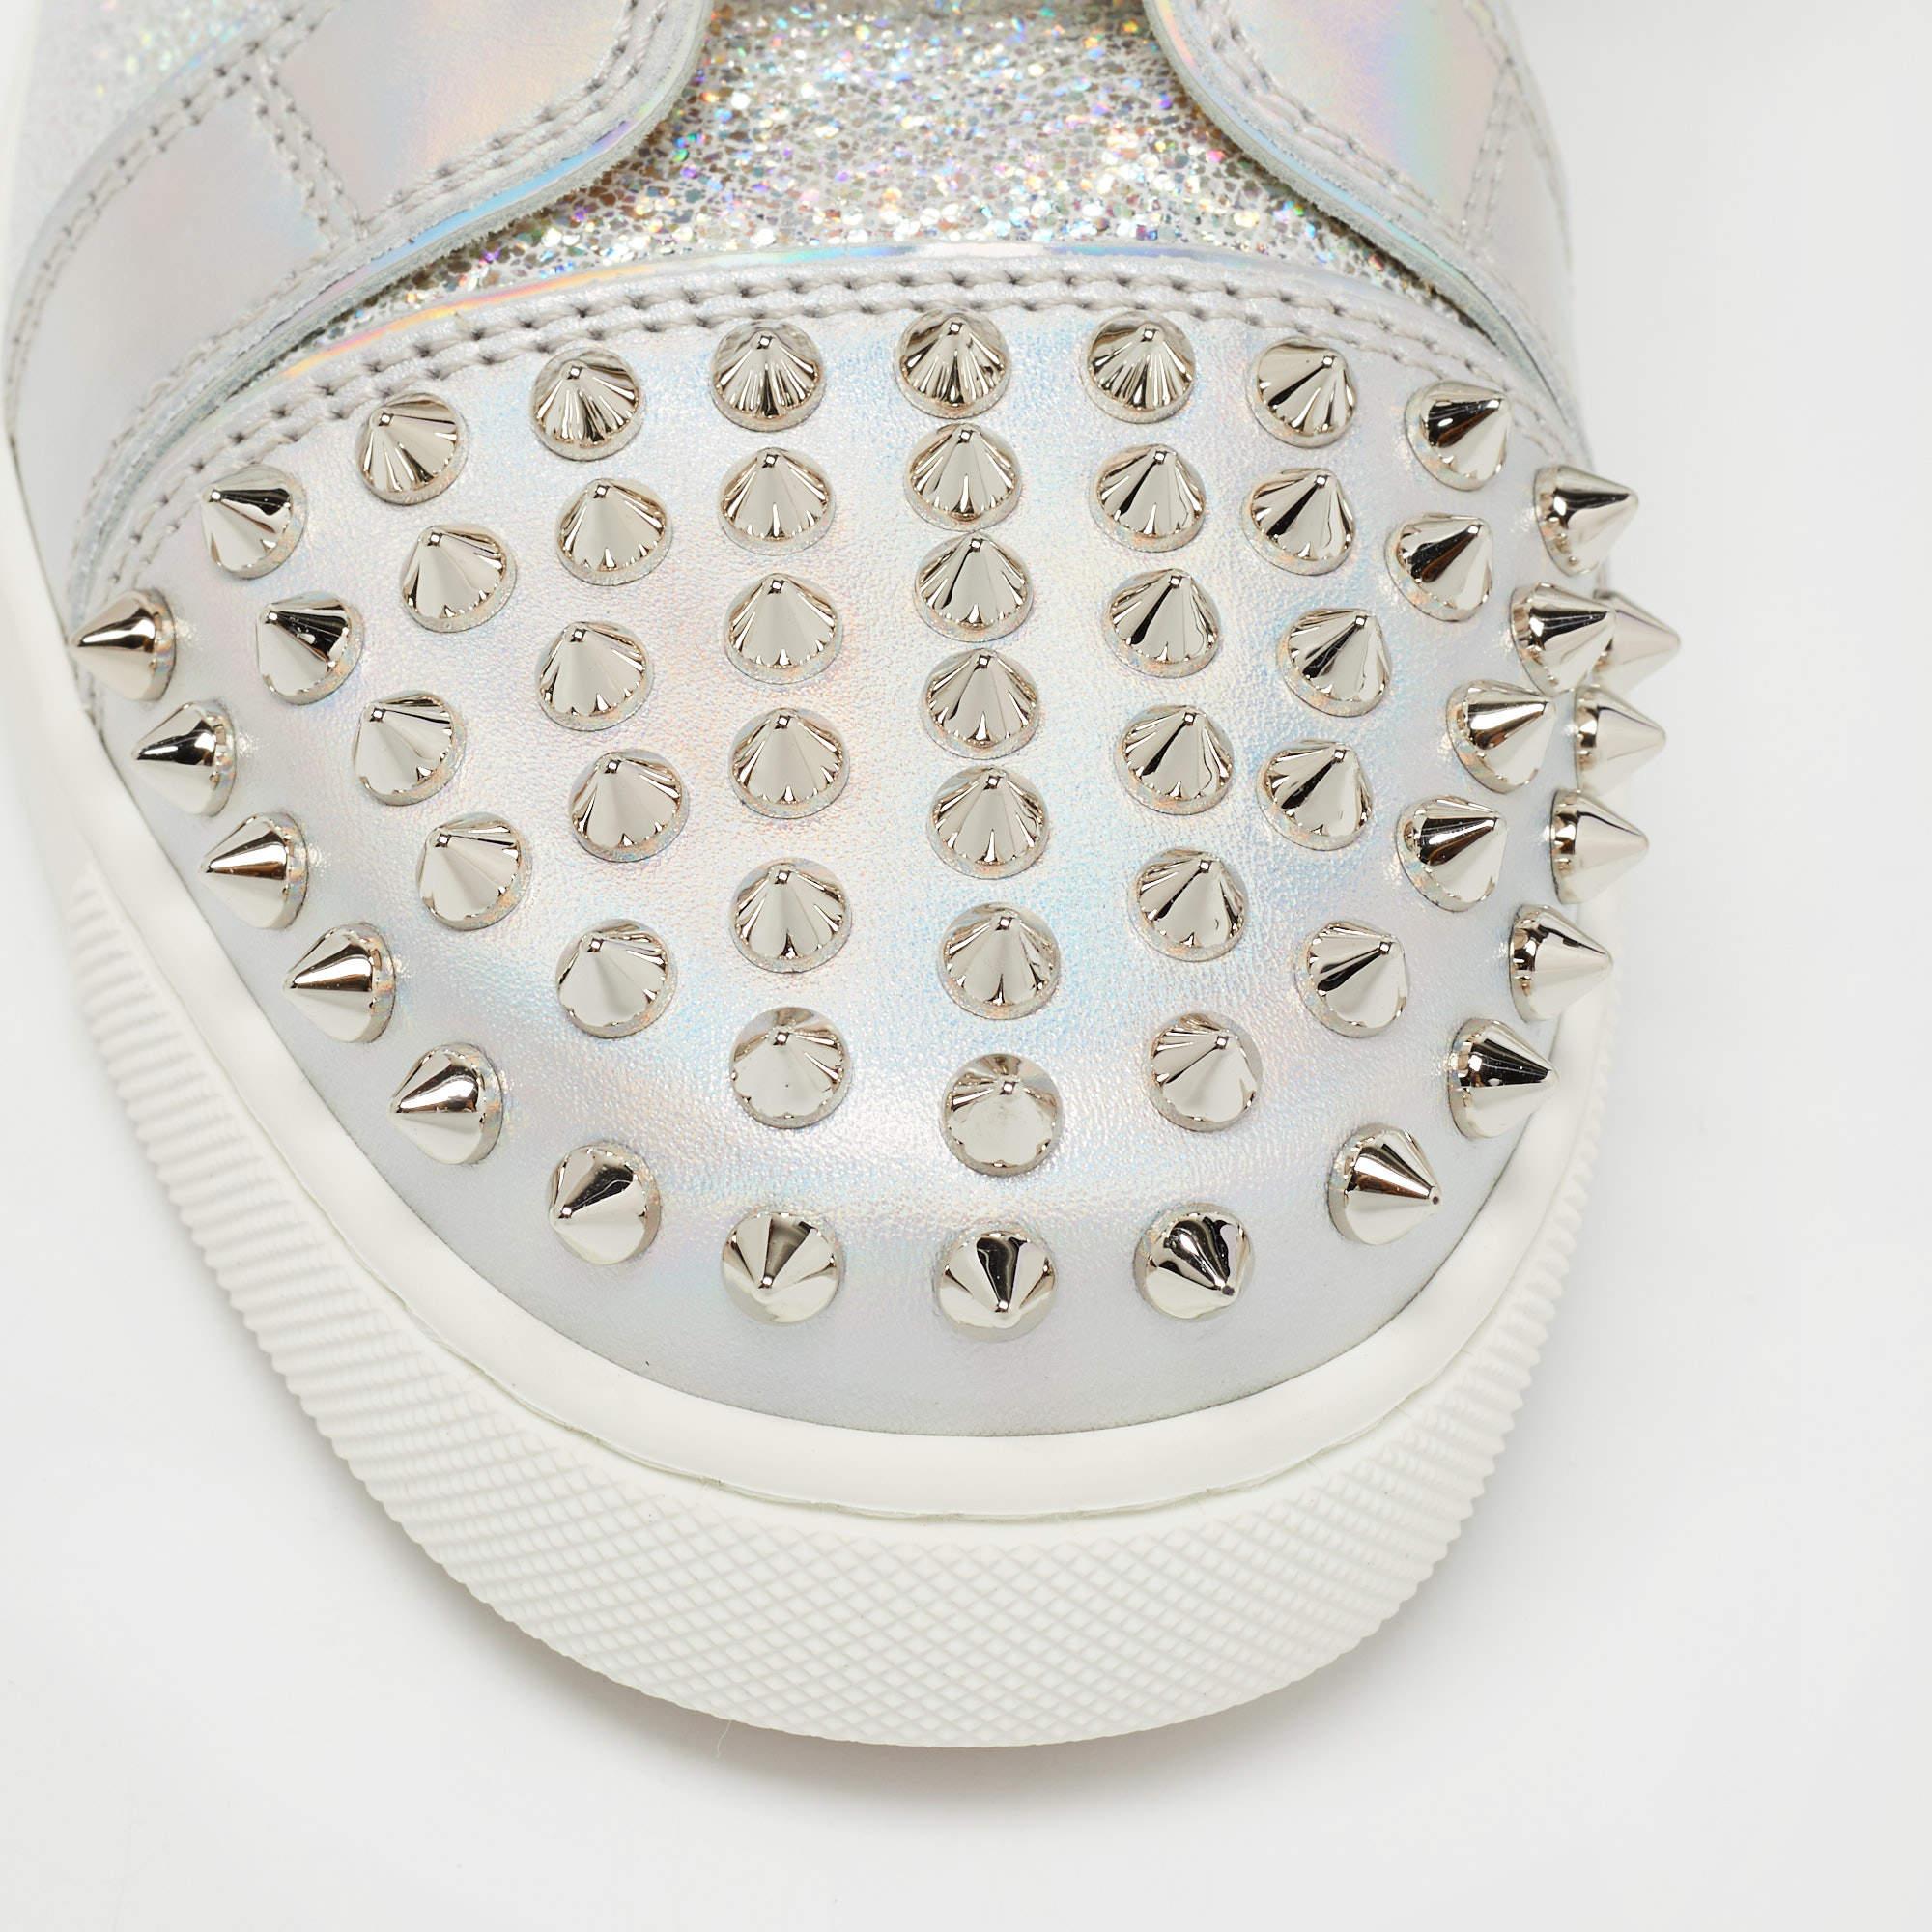 Christian Louboutin Silver Laminated Suede and Leather Lou Spikes High Top Sneak 2